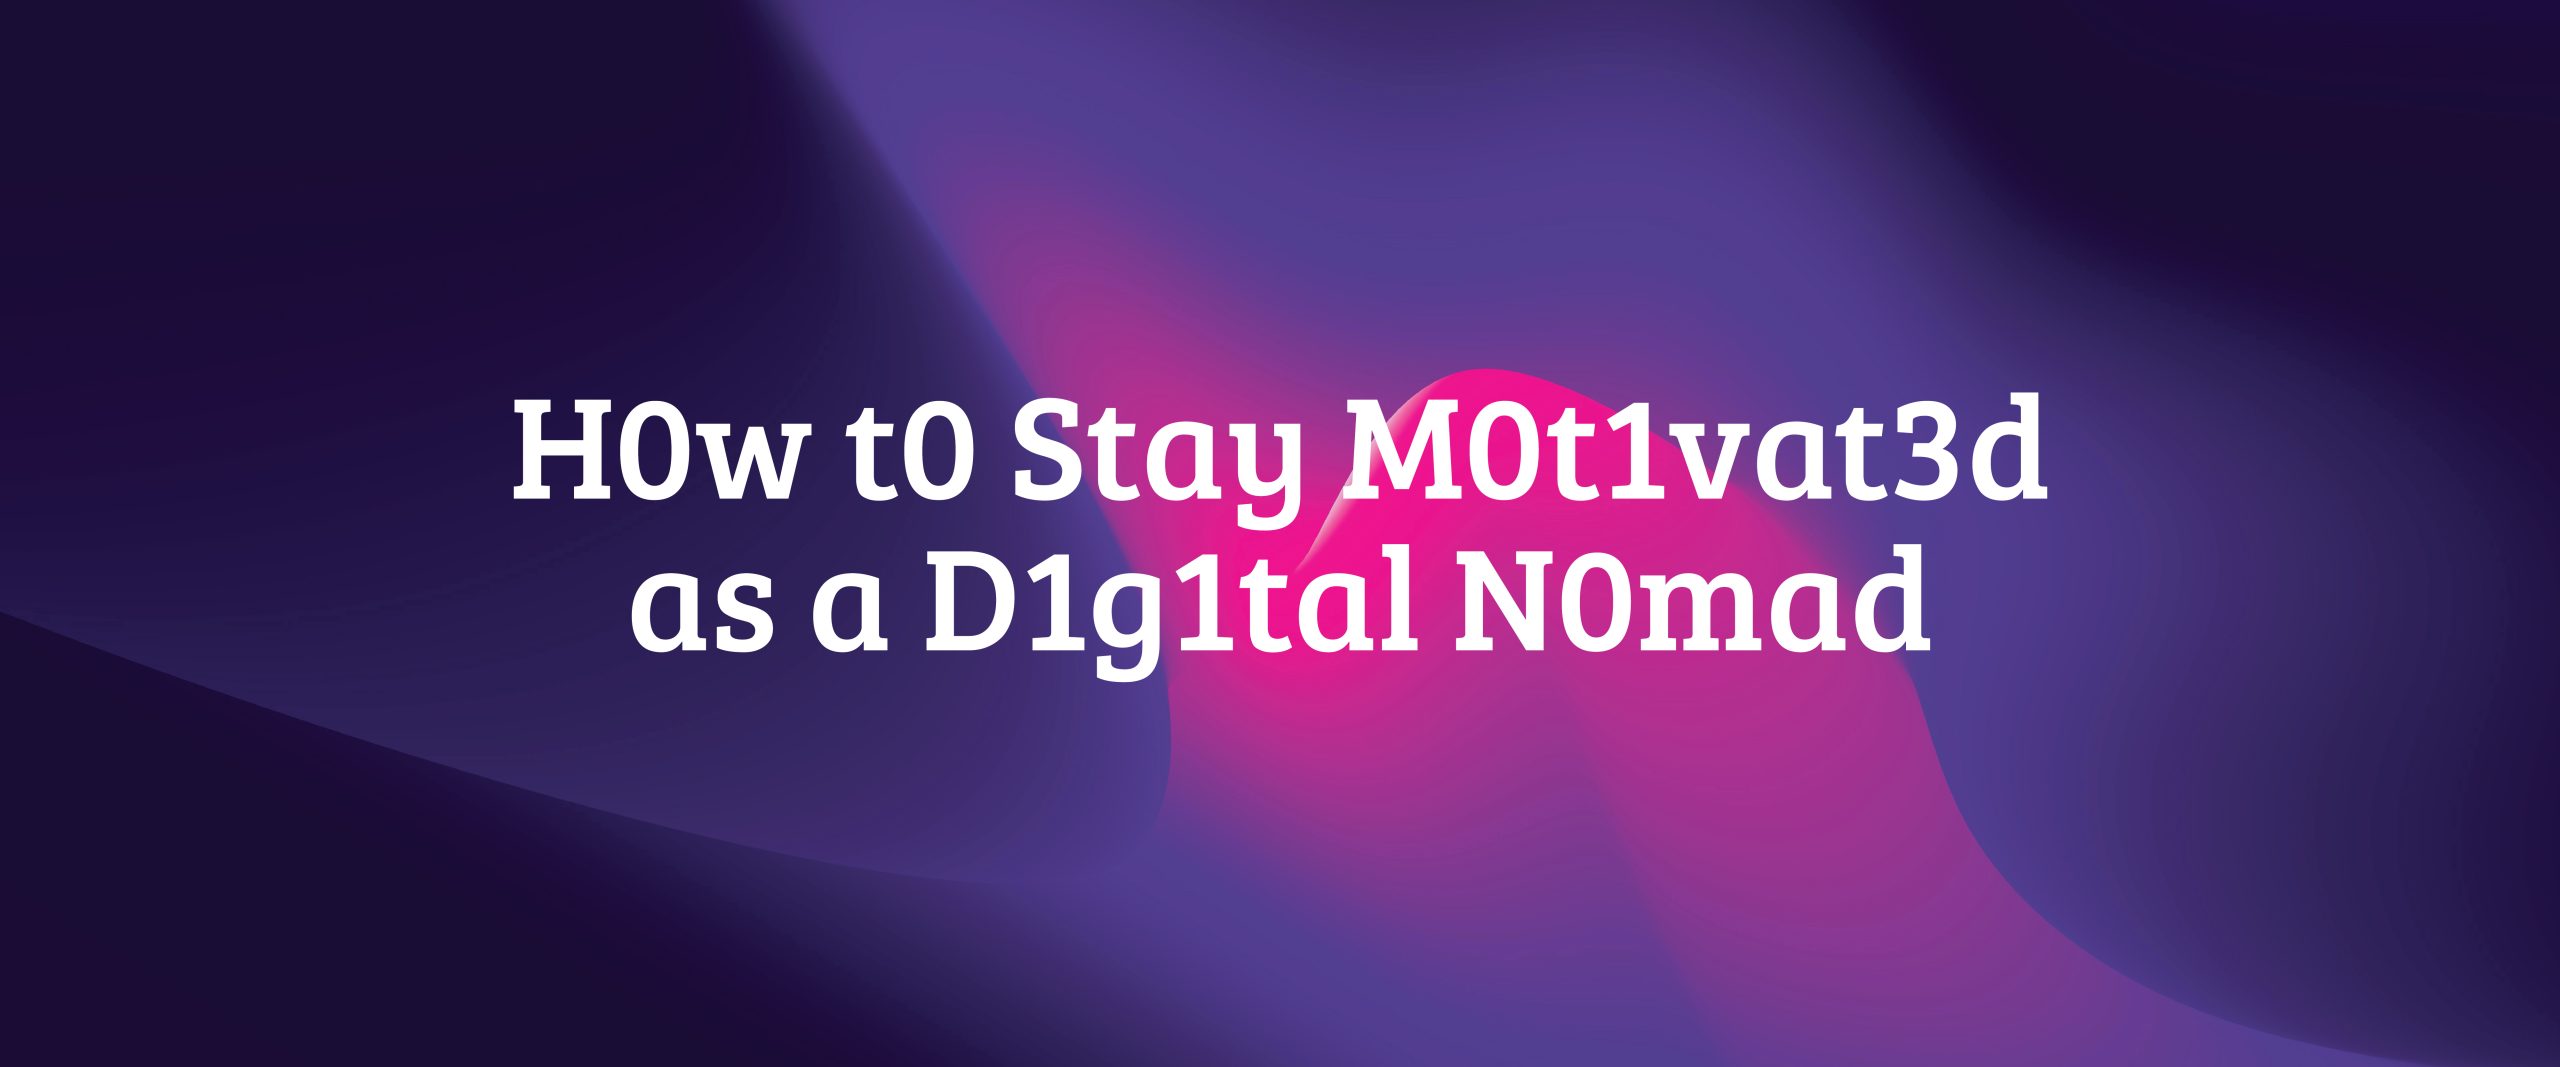 How to Stay Motivated as a Digital Nomad